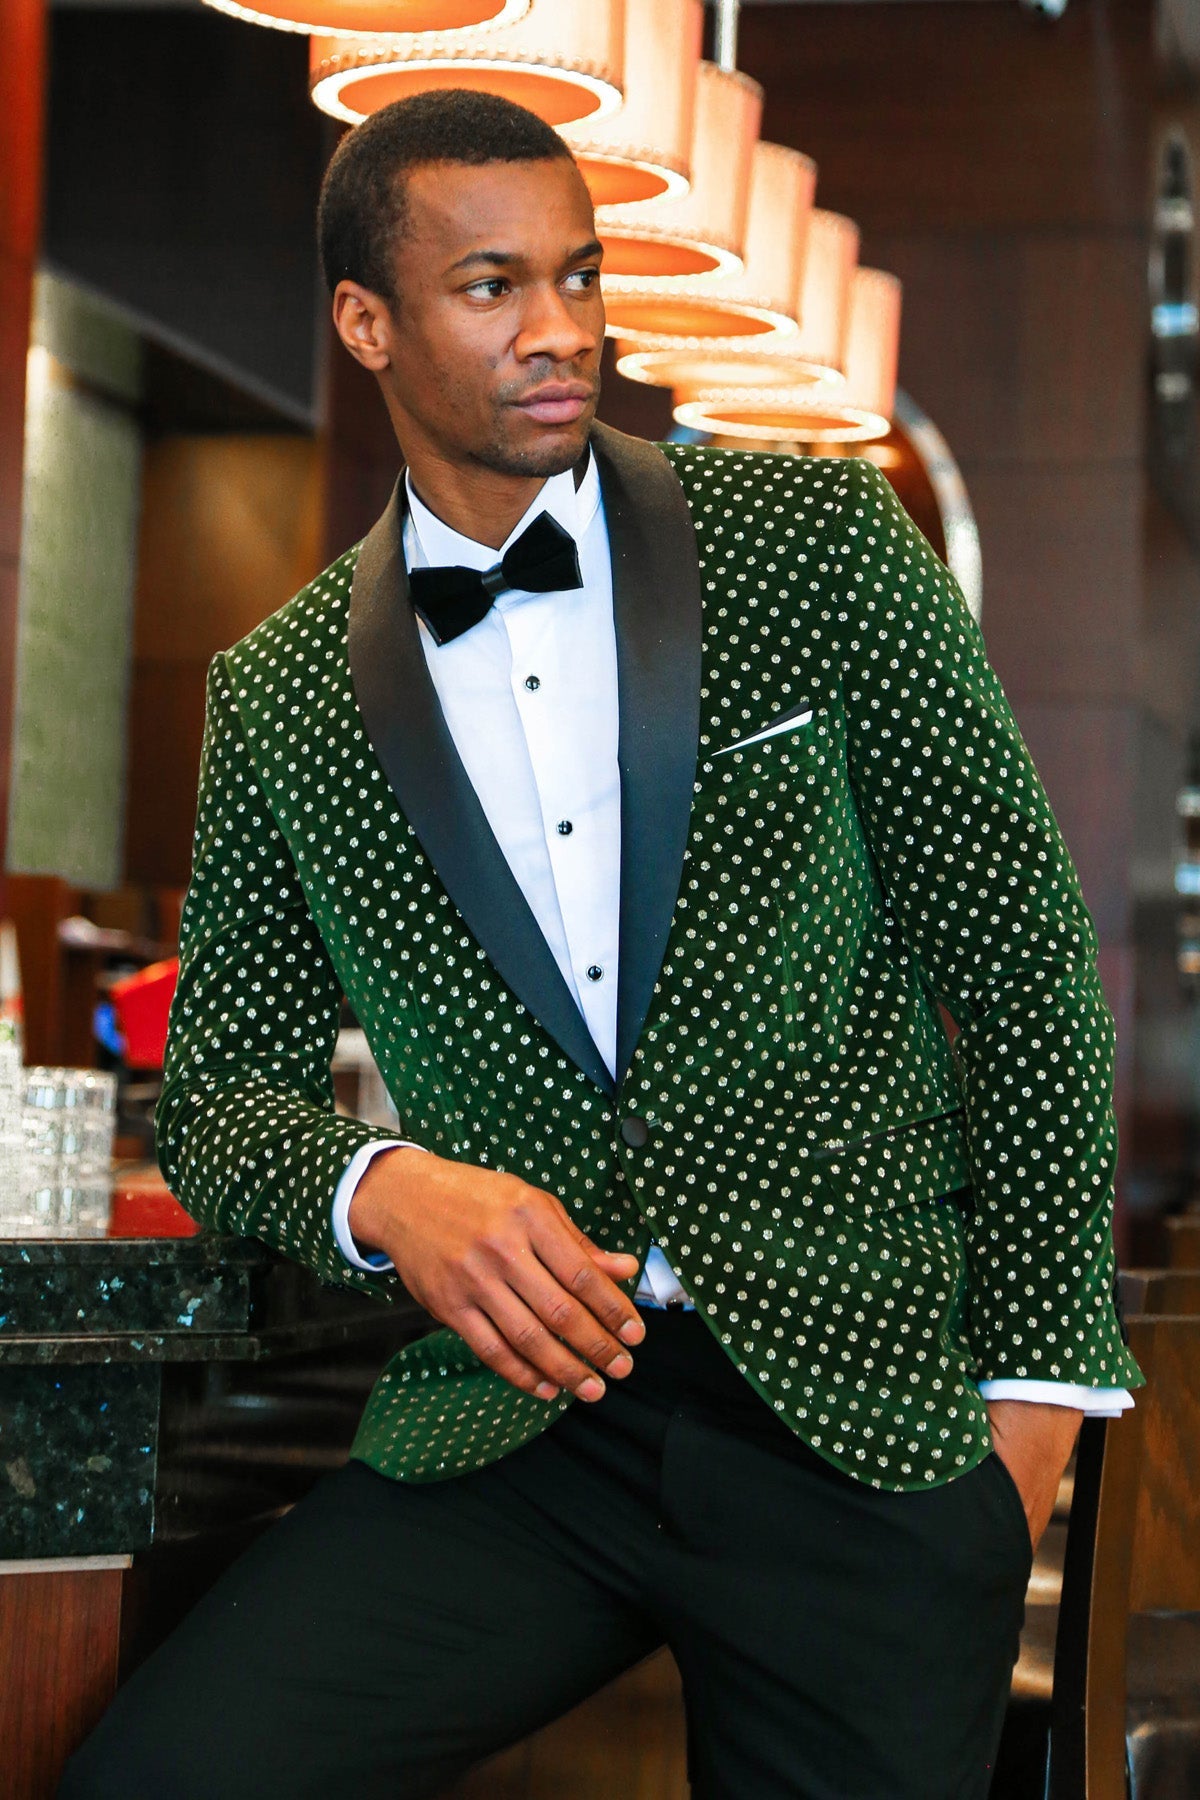 Emerald Green Jacket with Black Satin Shawl Lapel and Diamond Pattern, available exclusively at KCT Menswear.